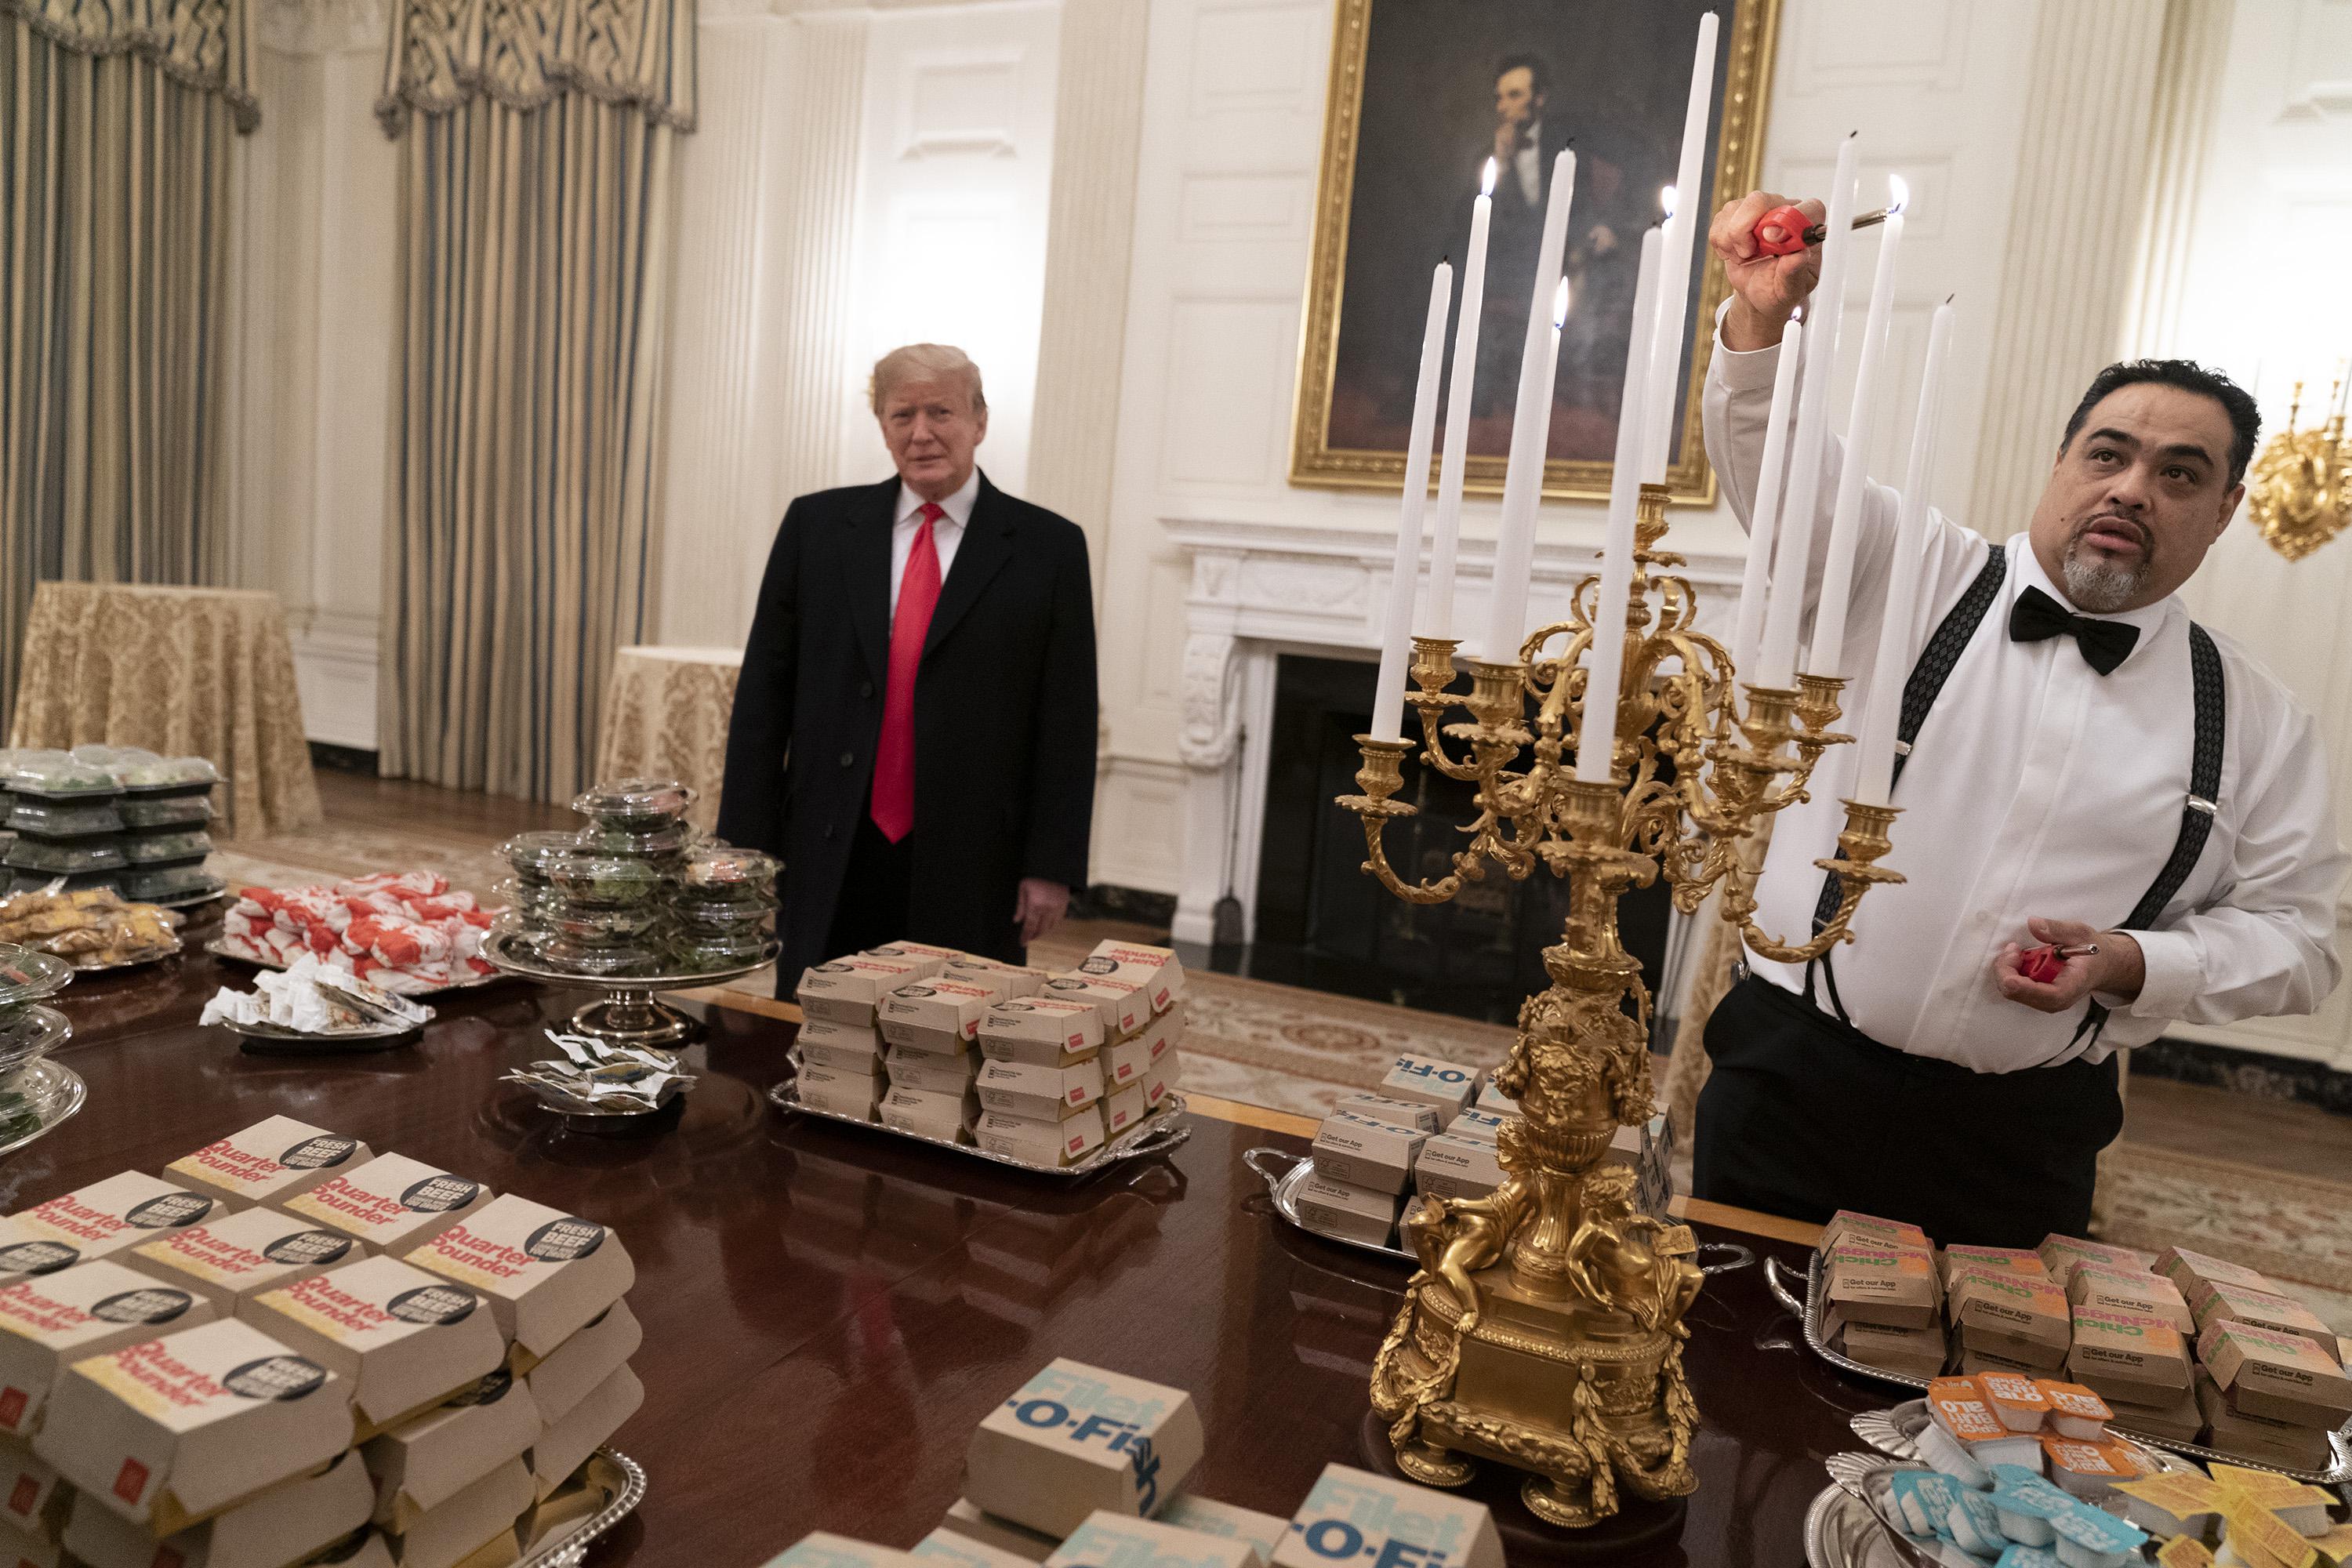 Trump looks awkwardly on as a White House staffer lights an elaborate candelabra over a table full of fast food burgers.